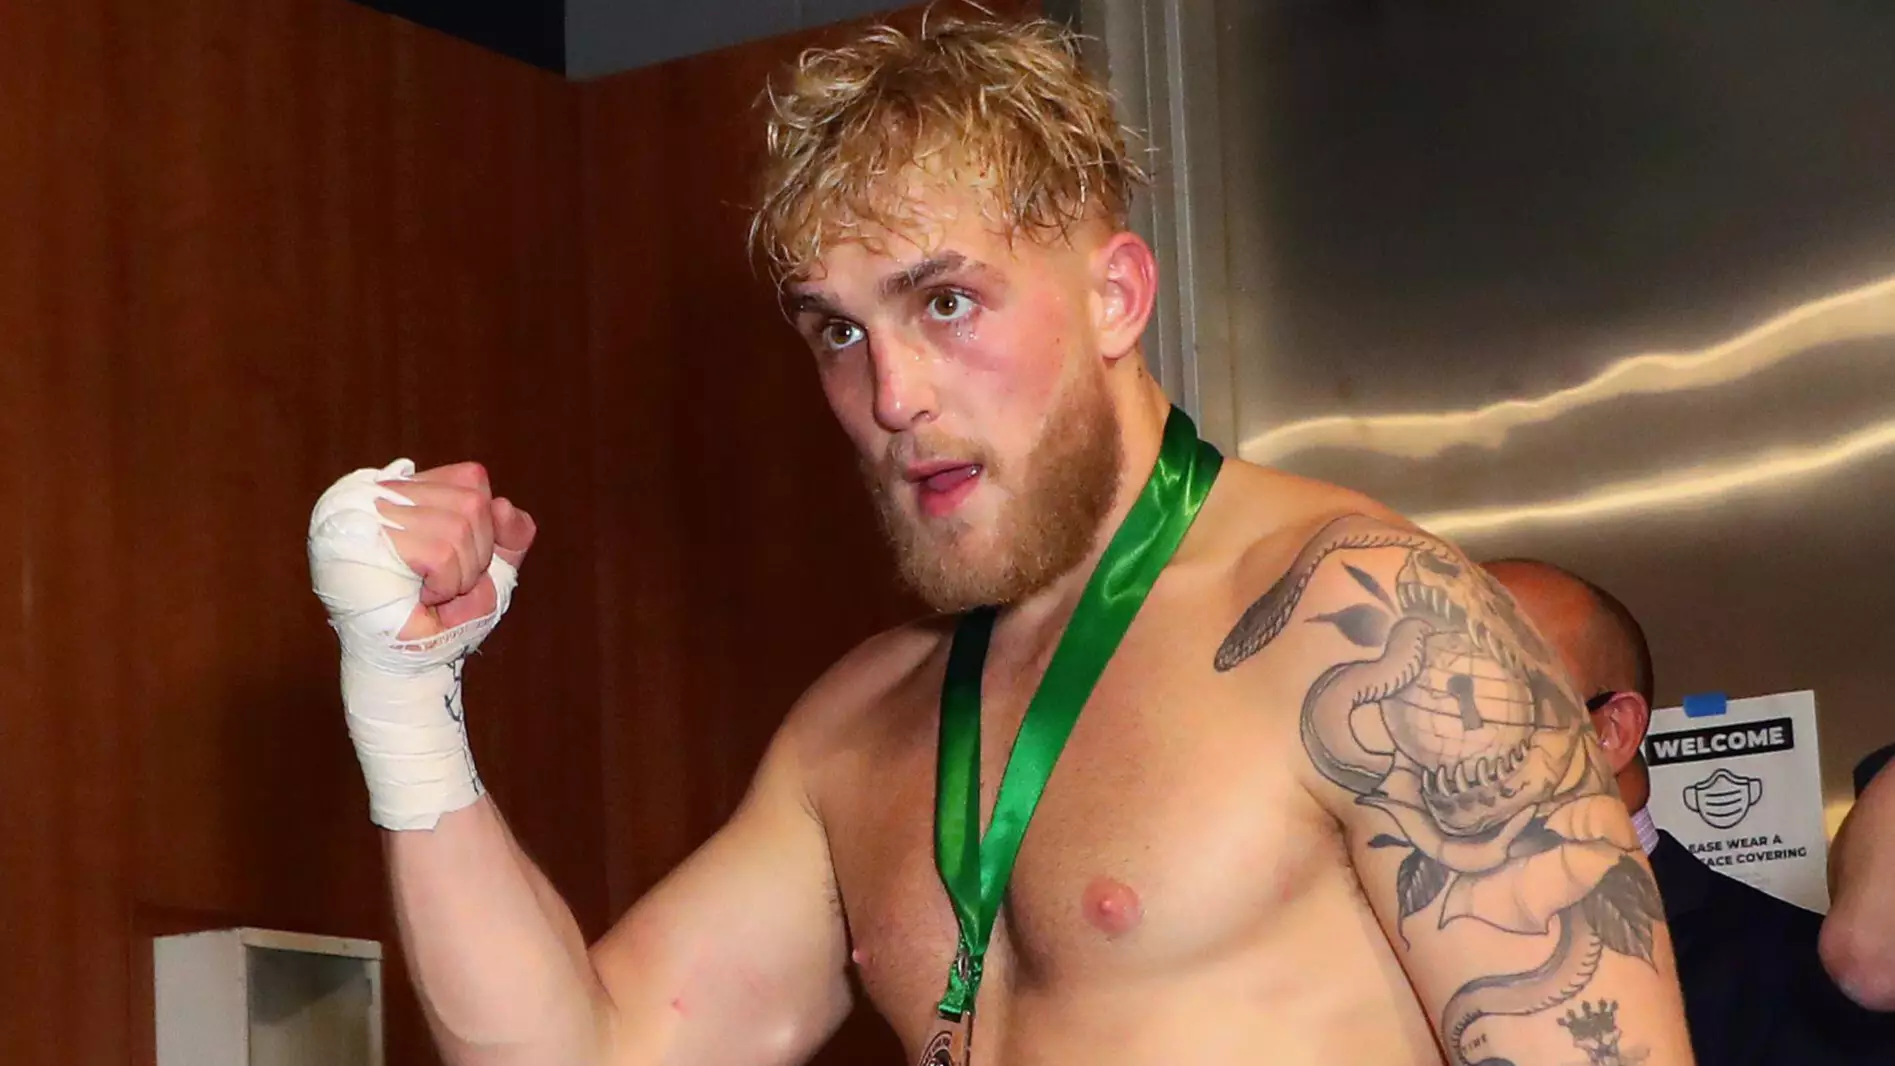 Jake Paul Enlists The 'Island Boy' Rappers To Promote His Upcoming Boxing Fight